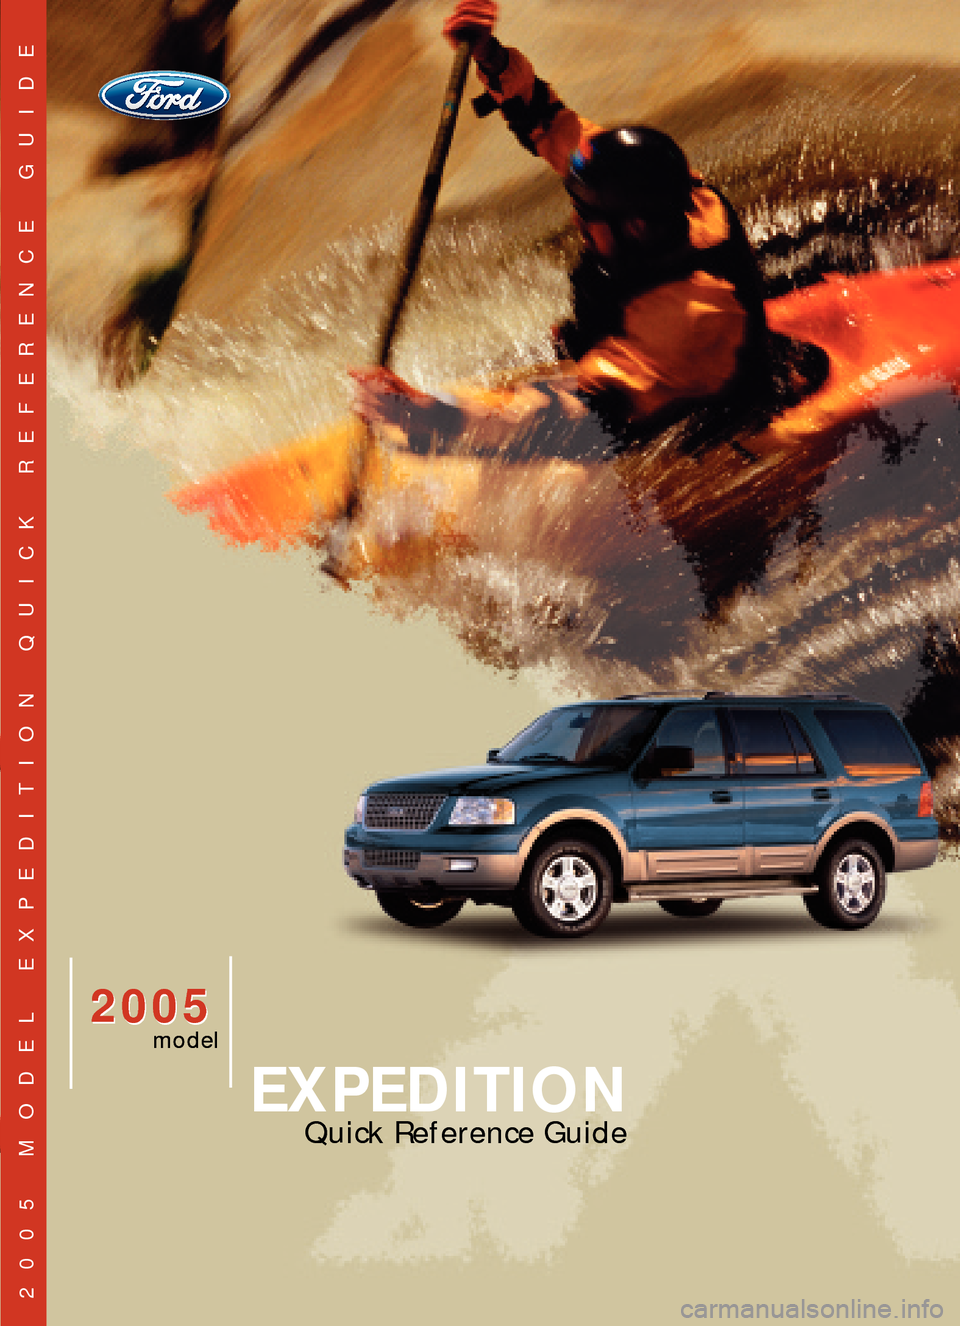 FORD EXPEDITION 2005 2.G Quick Reference Guide 2005
EXPEDITION
2005
model
Quick Reference Guide
2005 MODEL EXPEDITION QUICK REFERENCE GUIDE 